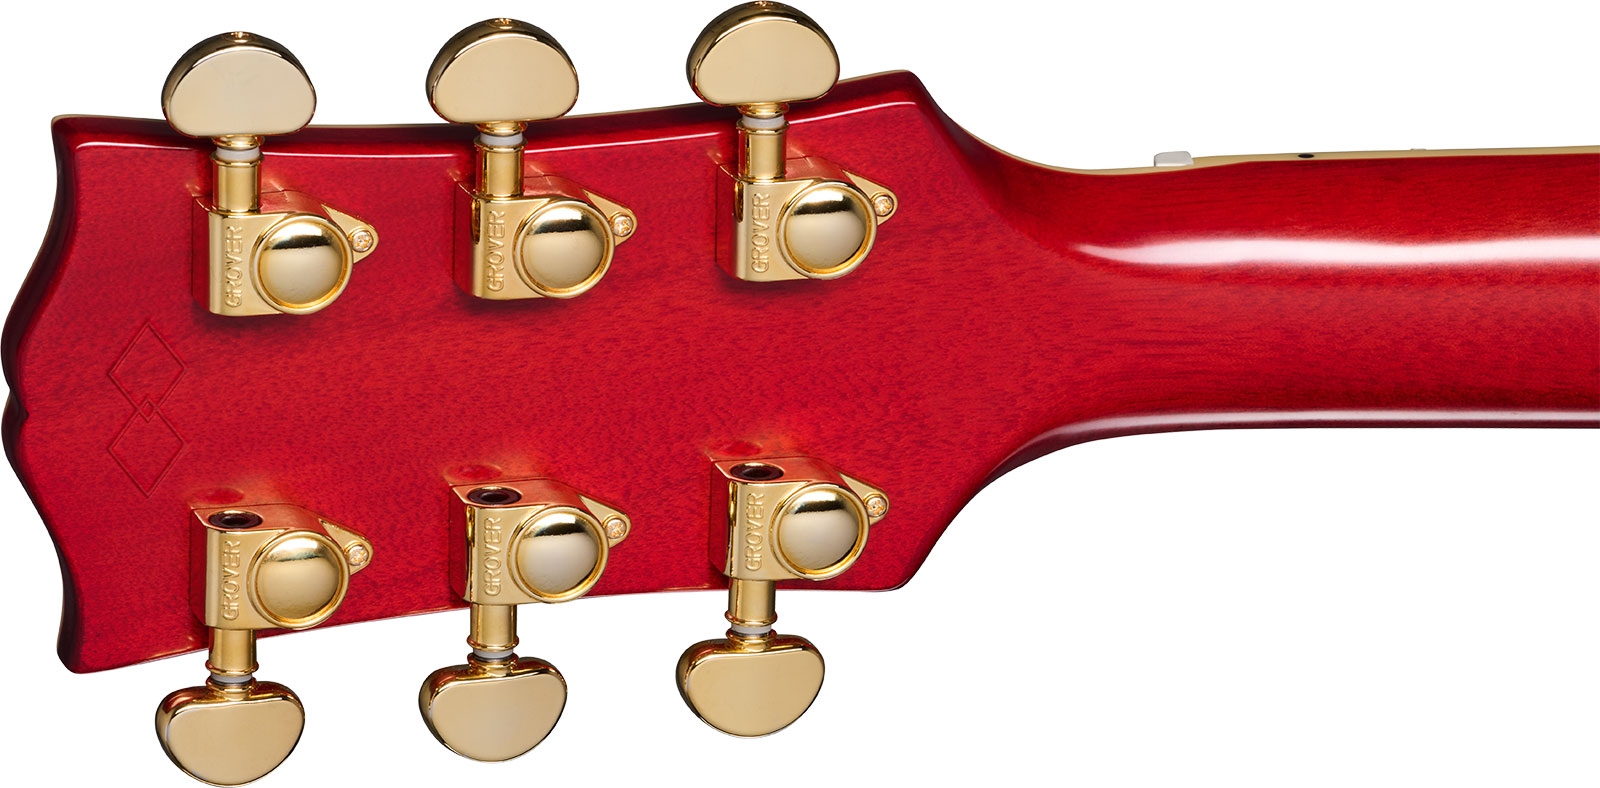 Epiphone Es355 1959 Inspired By 2h Gibson Ht Eb - Vos Cherry Red - Semi-hollow electric guitar - Variation 4